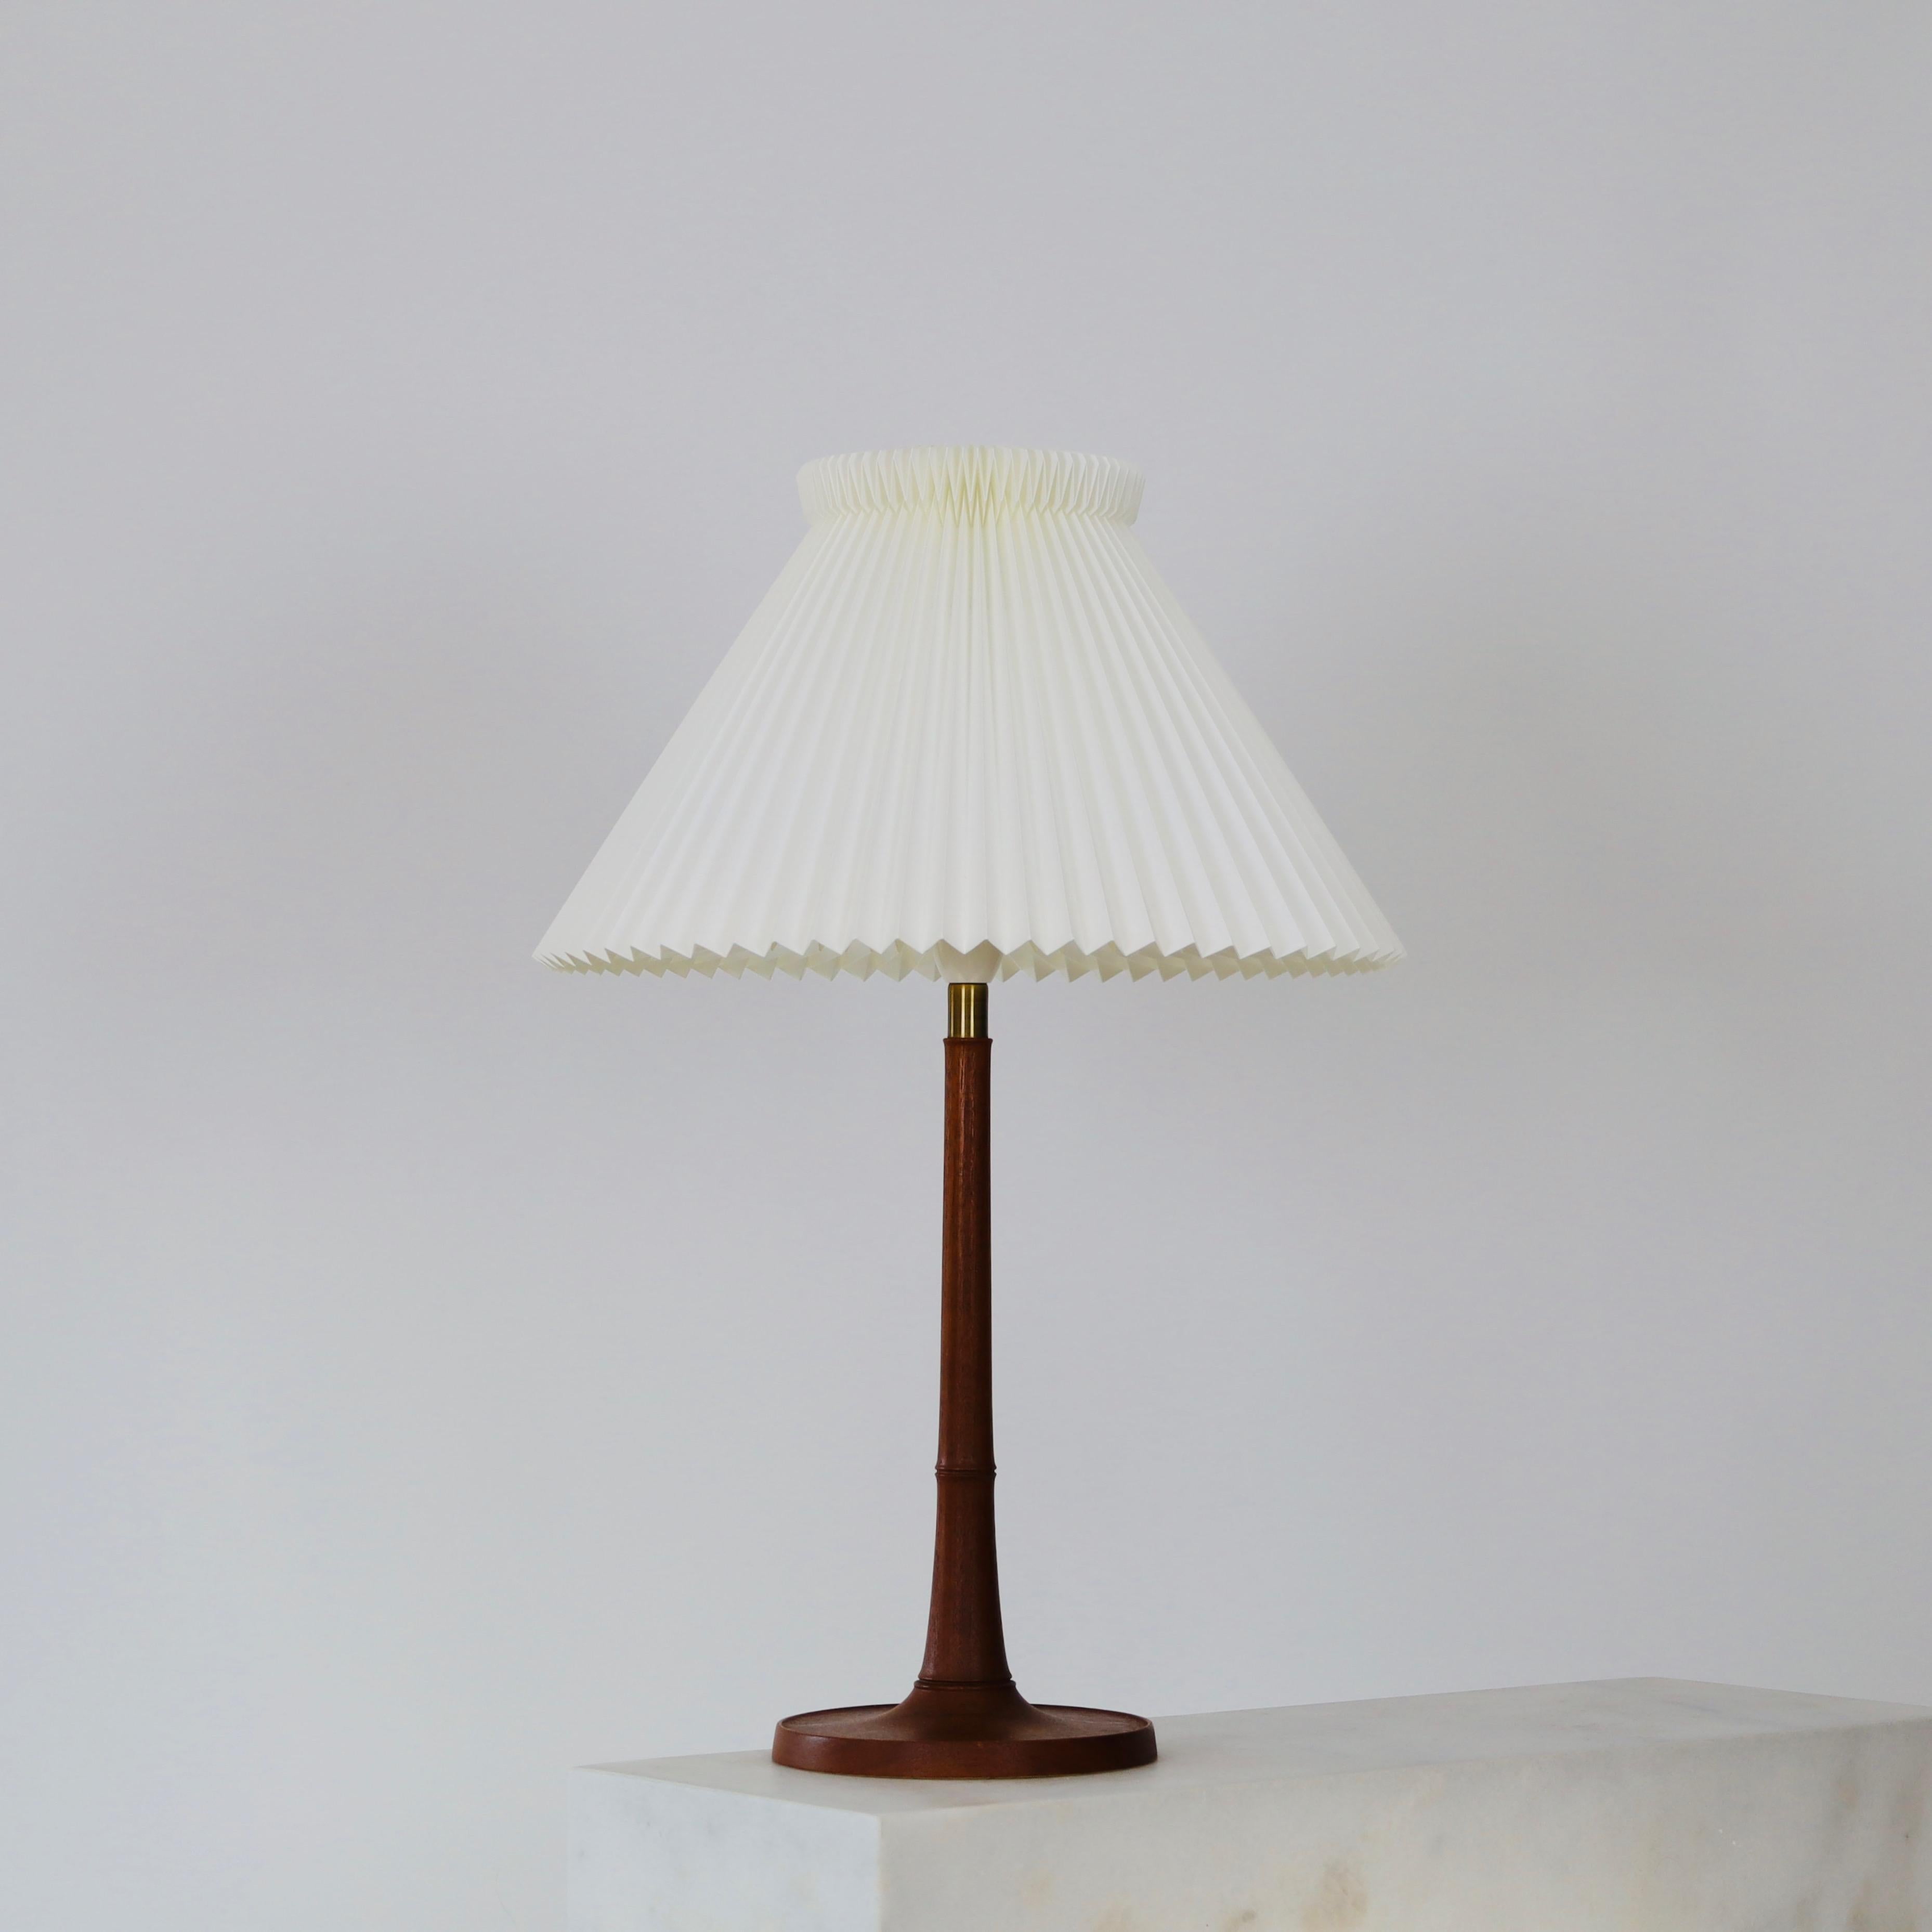 An oak wood table lamp in excellent vintage condition designed by Esben Klint in 1957 for Le Klint. It has a beautiful dark patina and is rare piece for a beautiful space.  

* An dark oak wood table lamp with a hand-pleated shade
* Designer: Esben